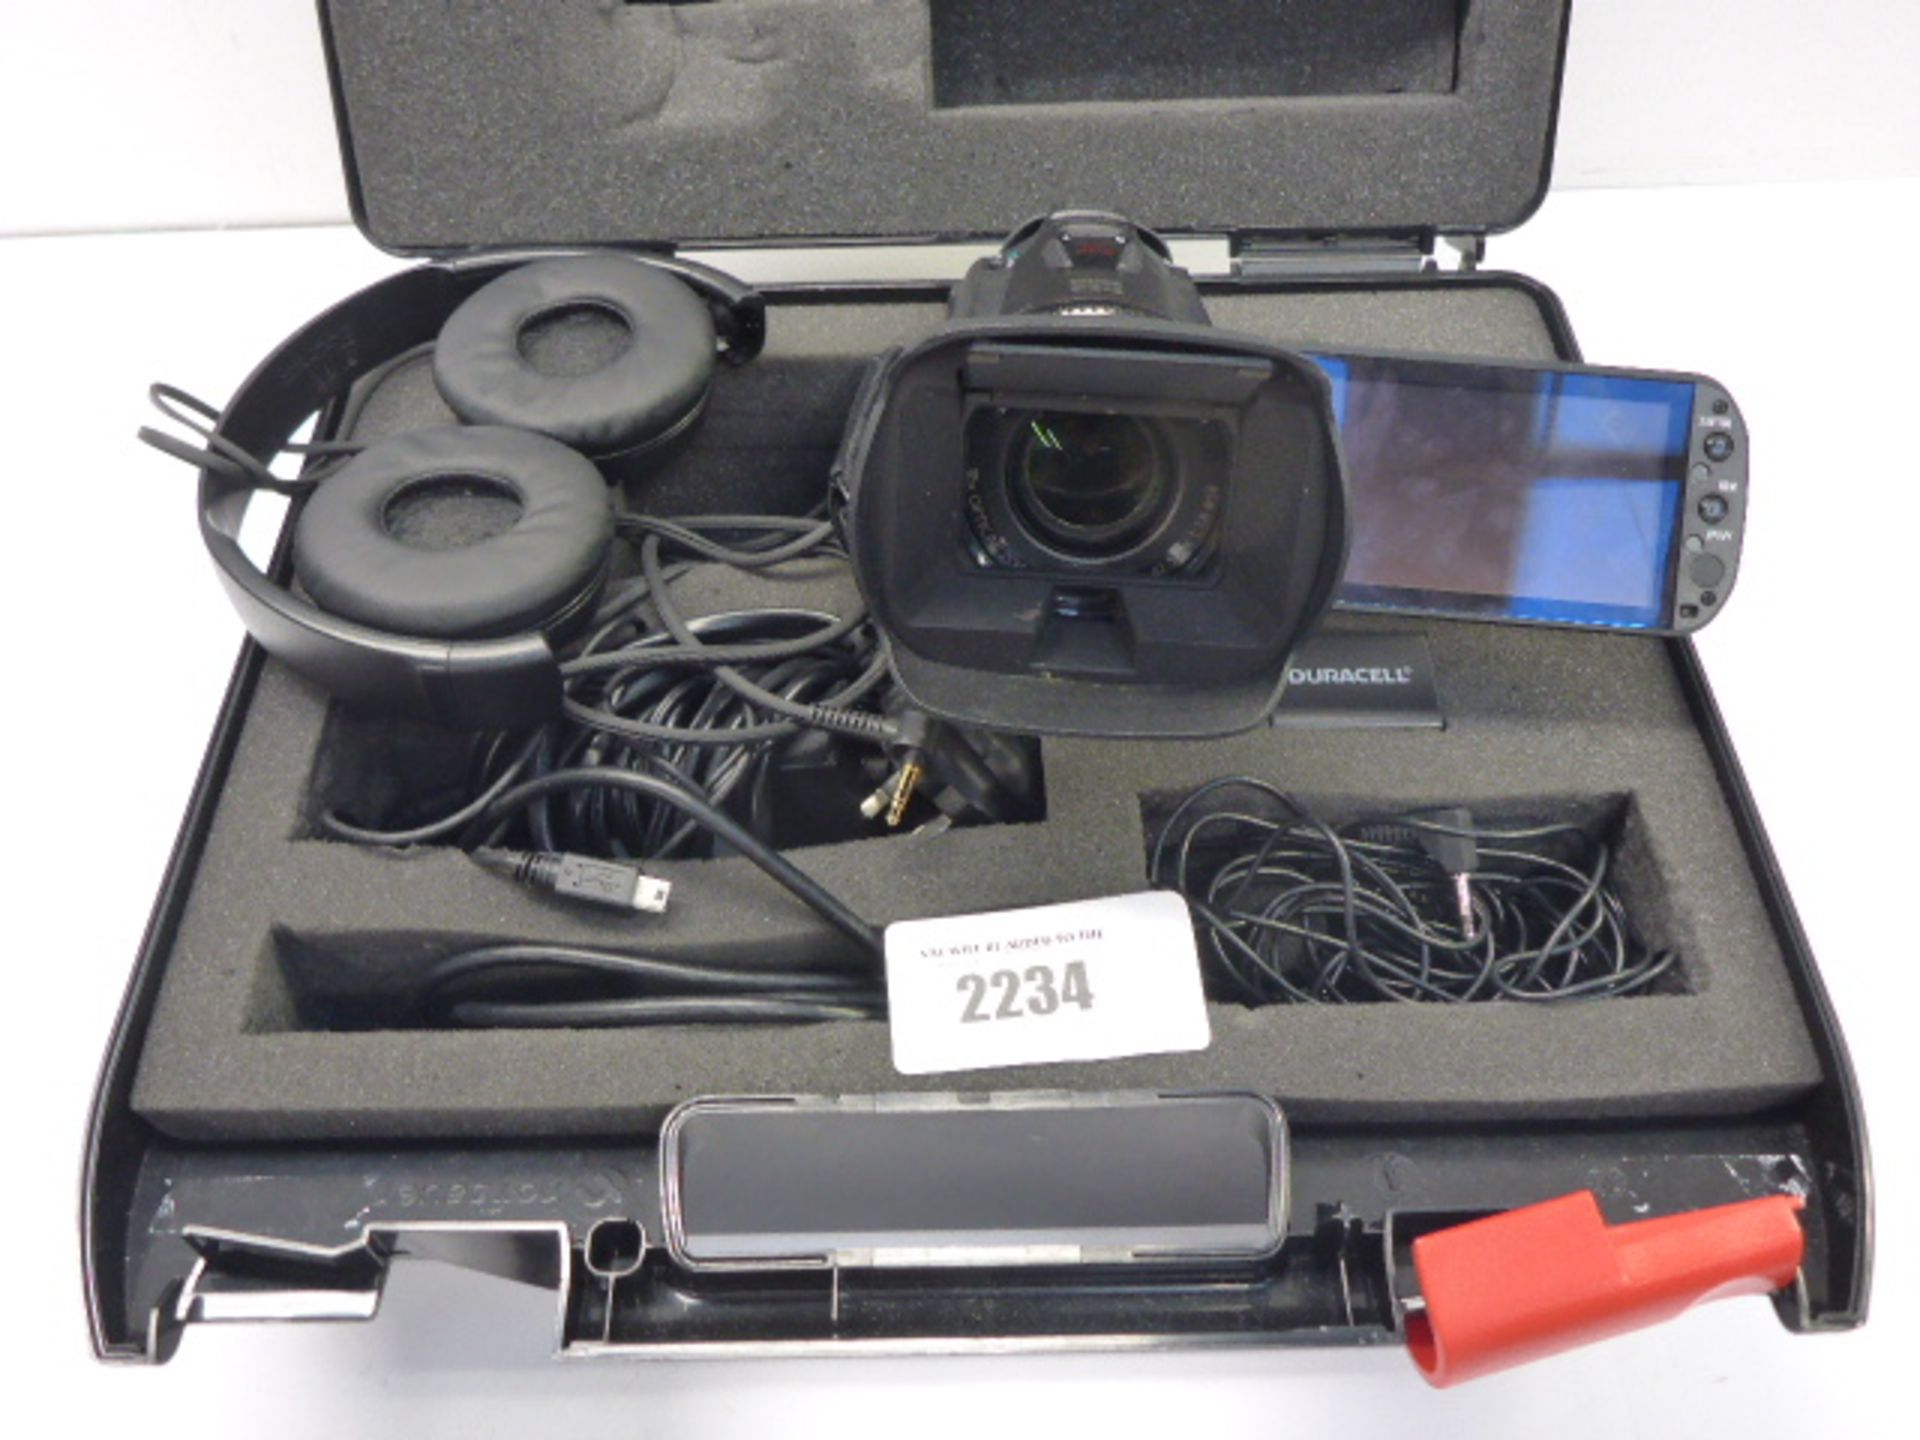 Canon Legria HFG25 HD camcorder with carry case and audio accessories